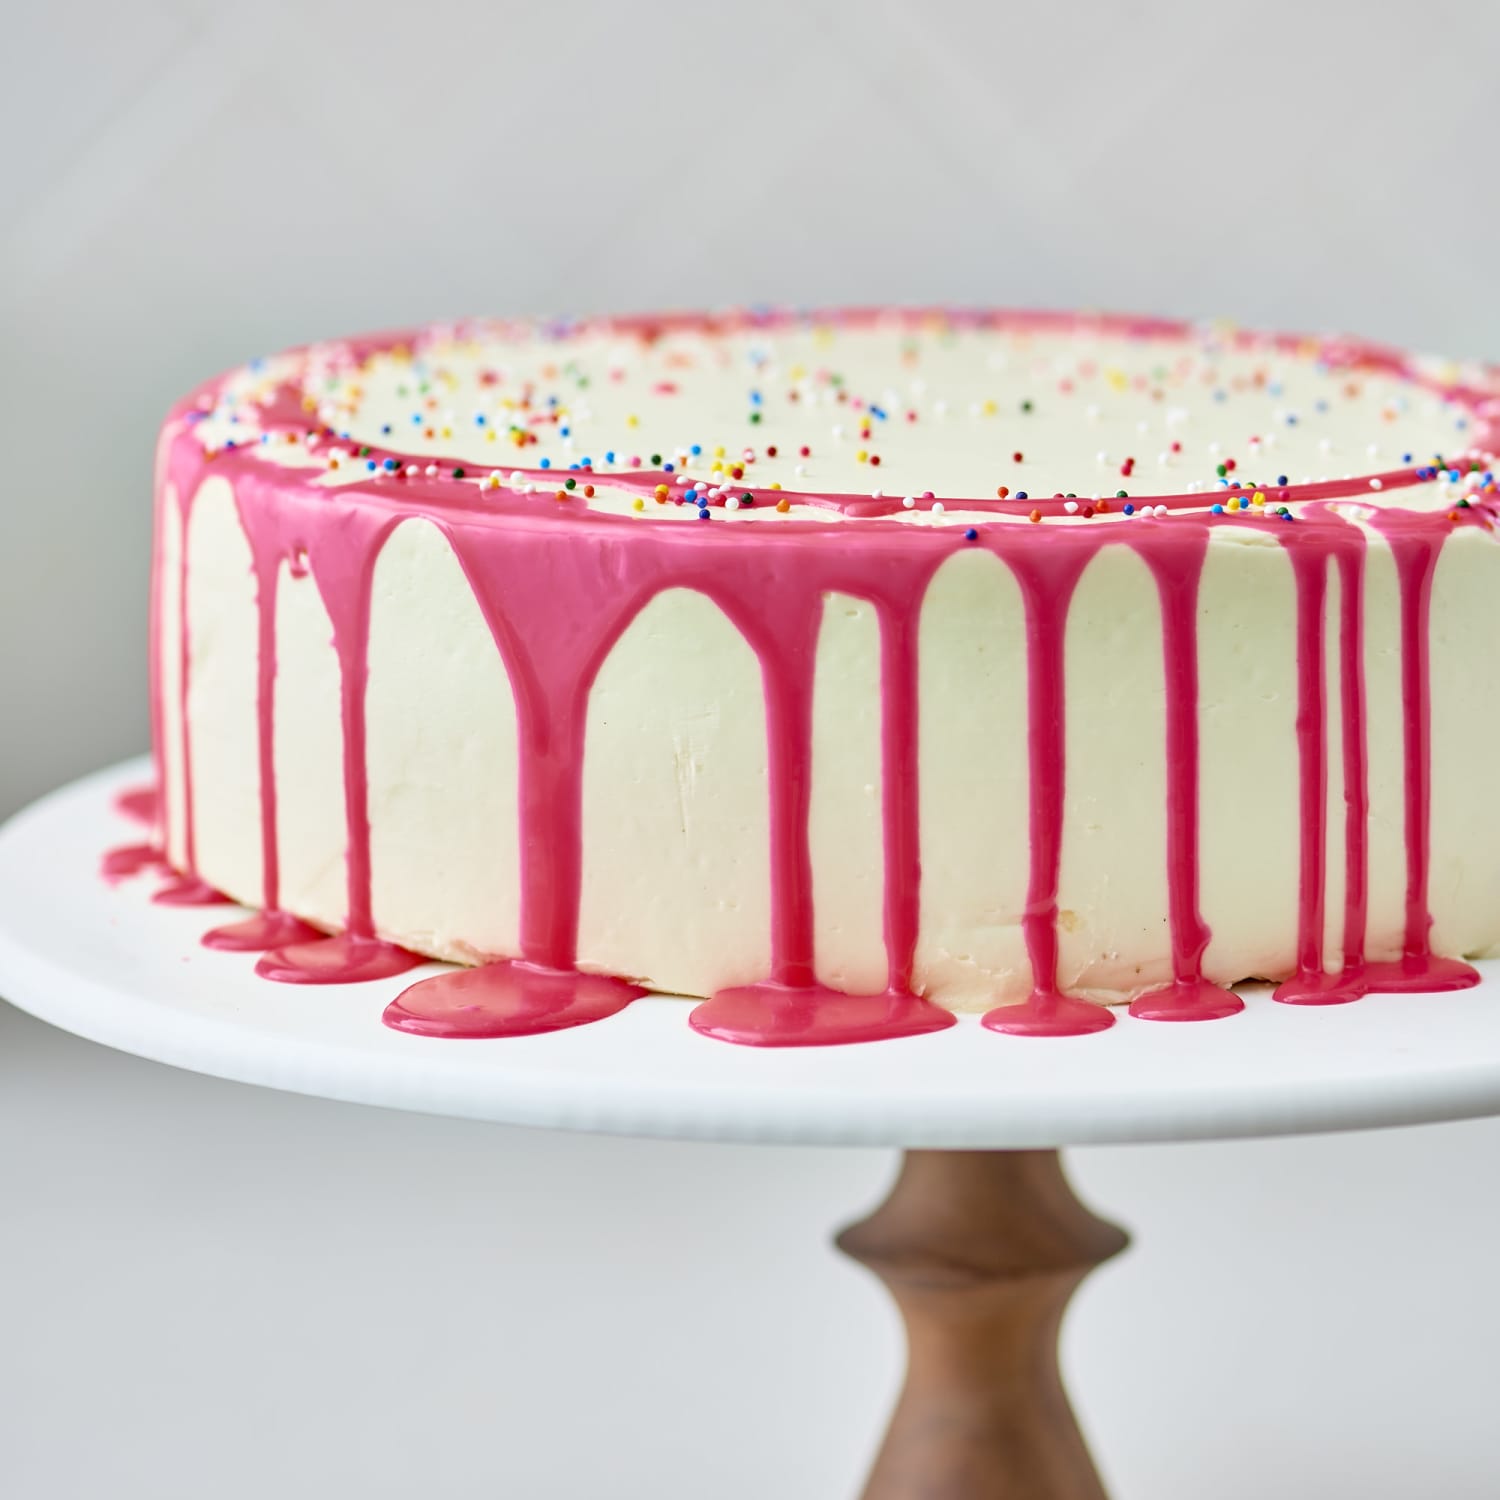 How do I achieve vibrant colored icing? : r/cakedecorating